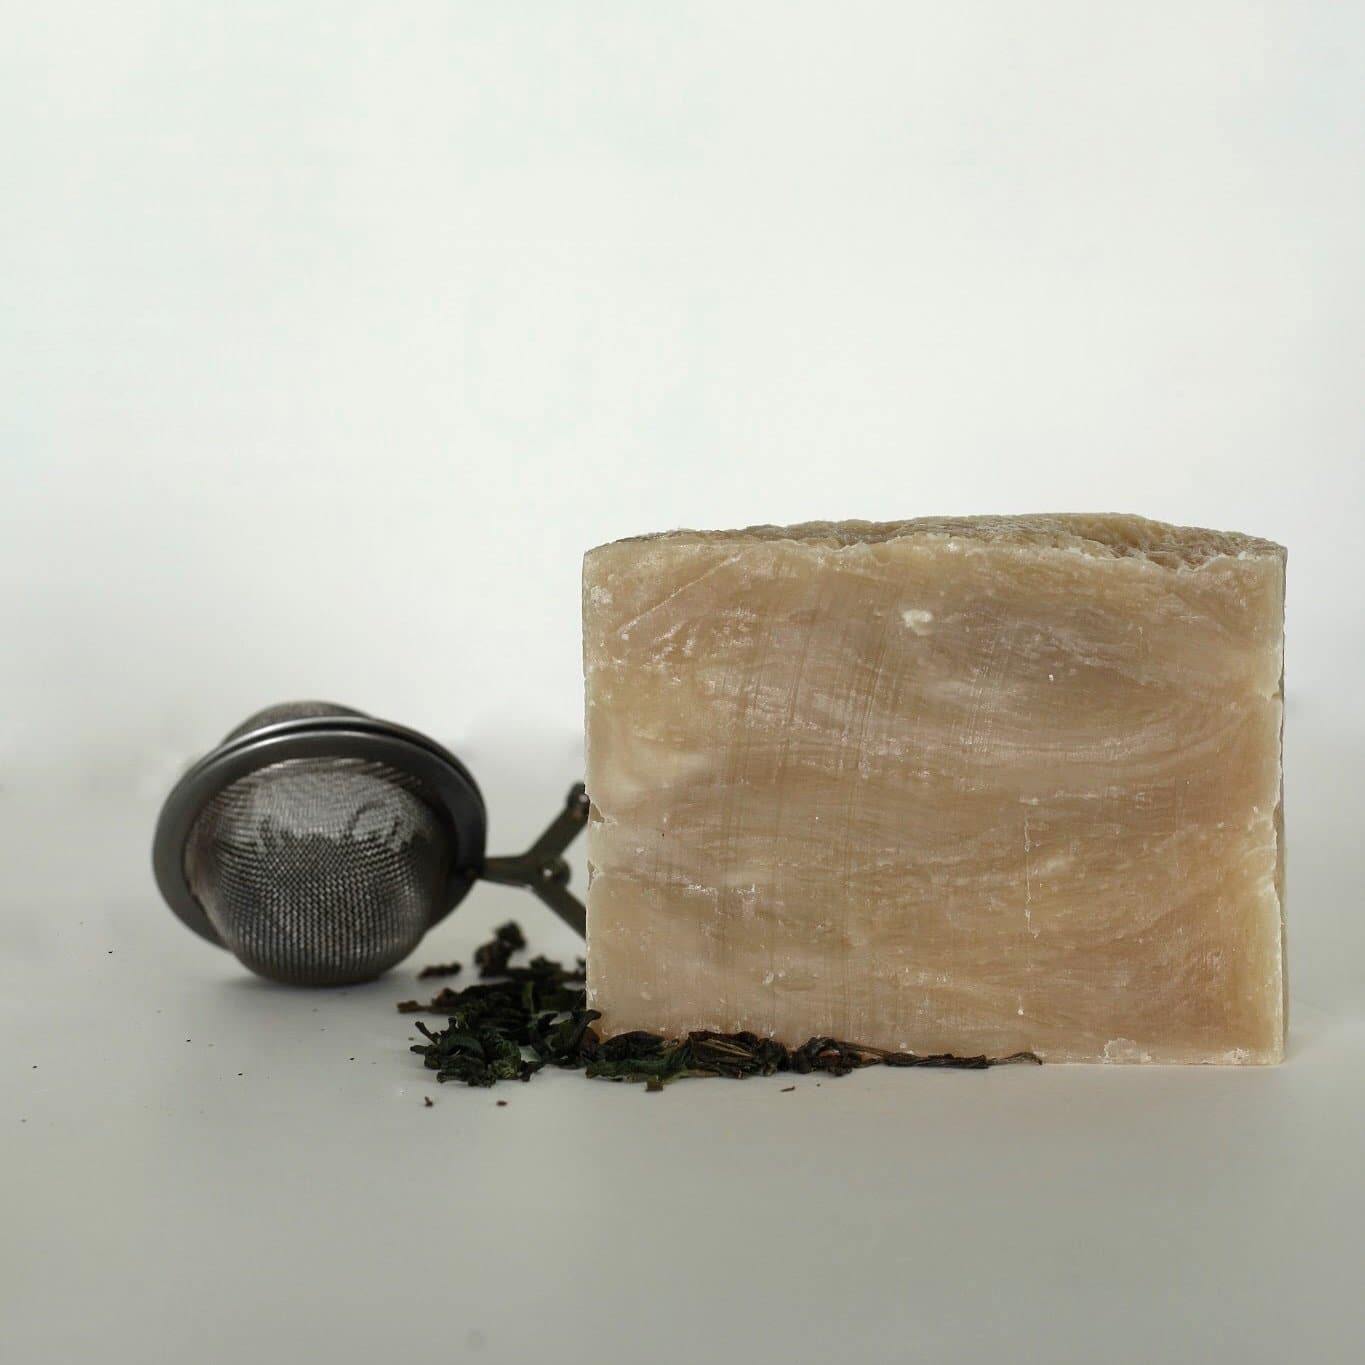 Cream soap bar sitting on top green tea leaves with a metal tea strainer next to it.